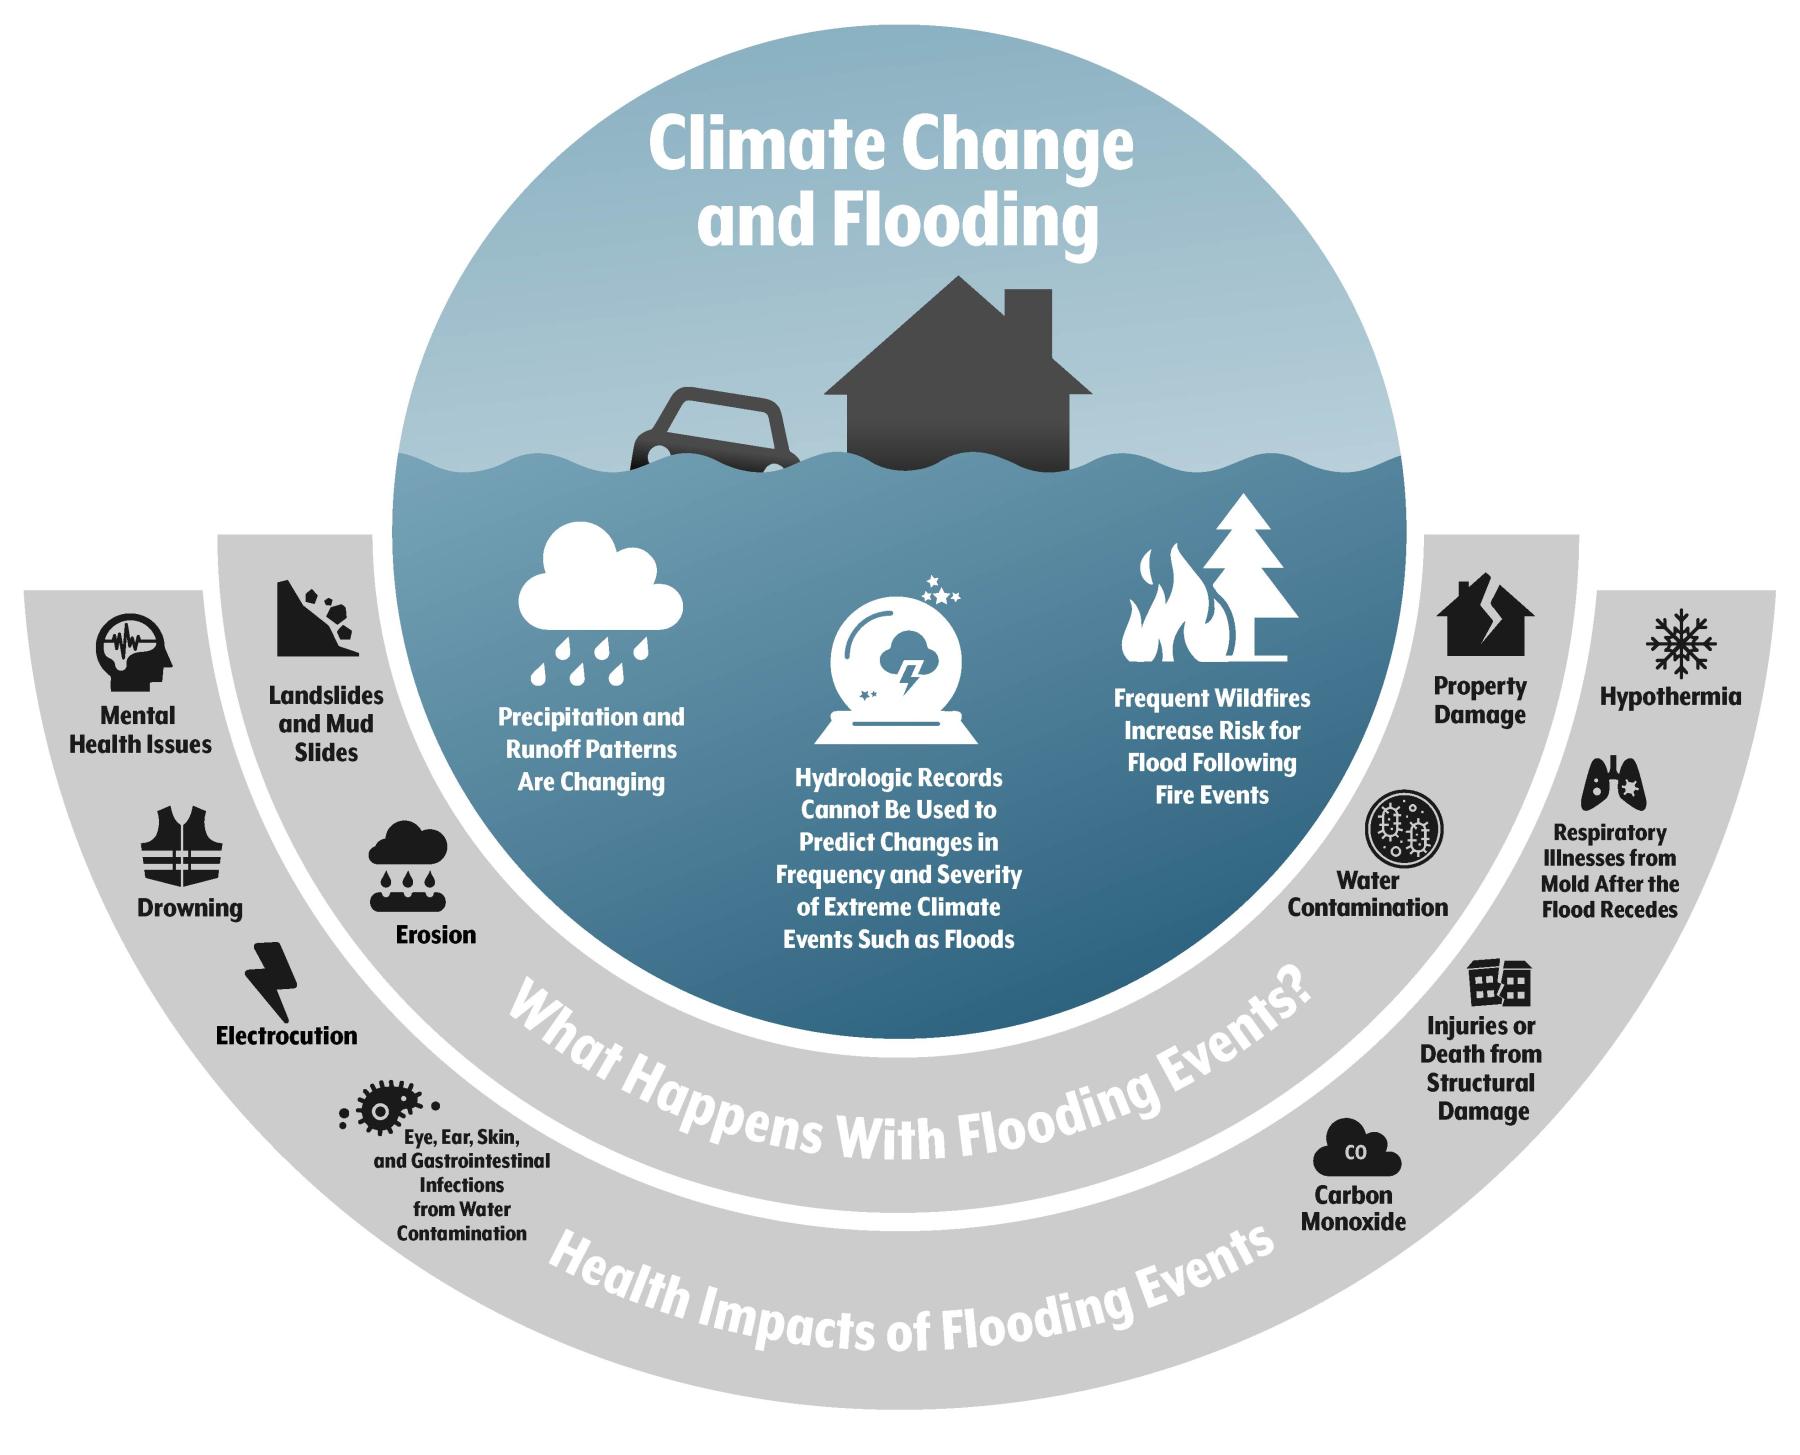 Figure 1: The Health Impacts of Flooding Events